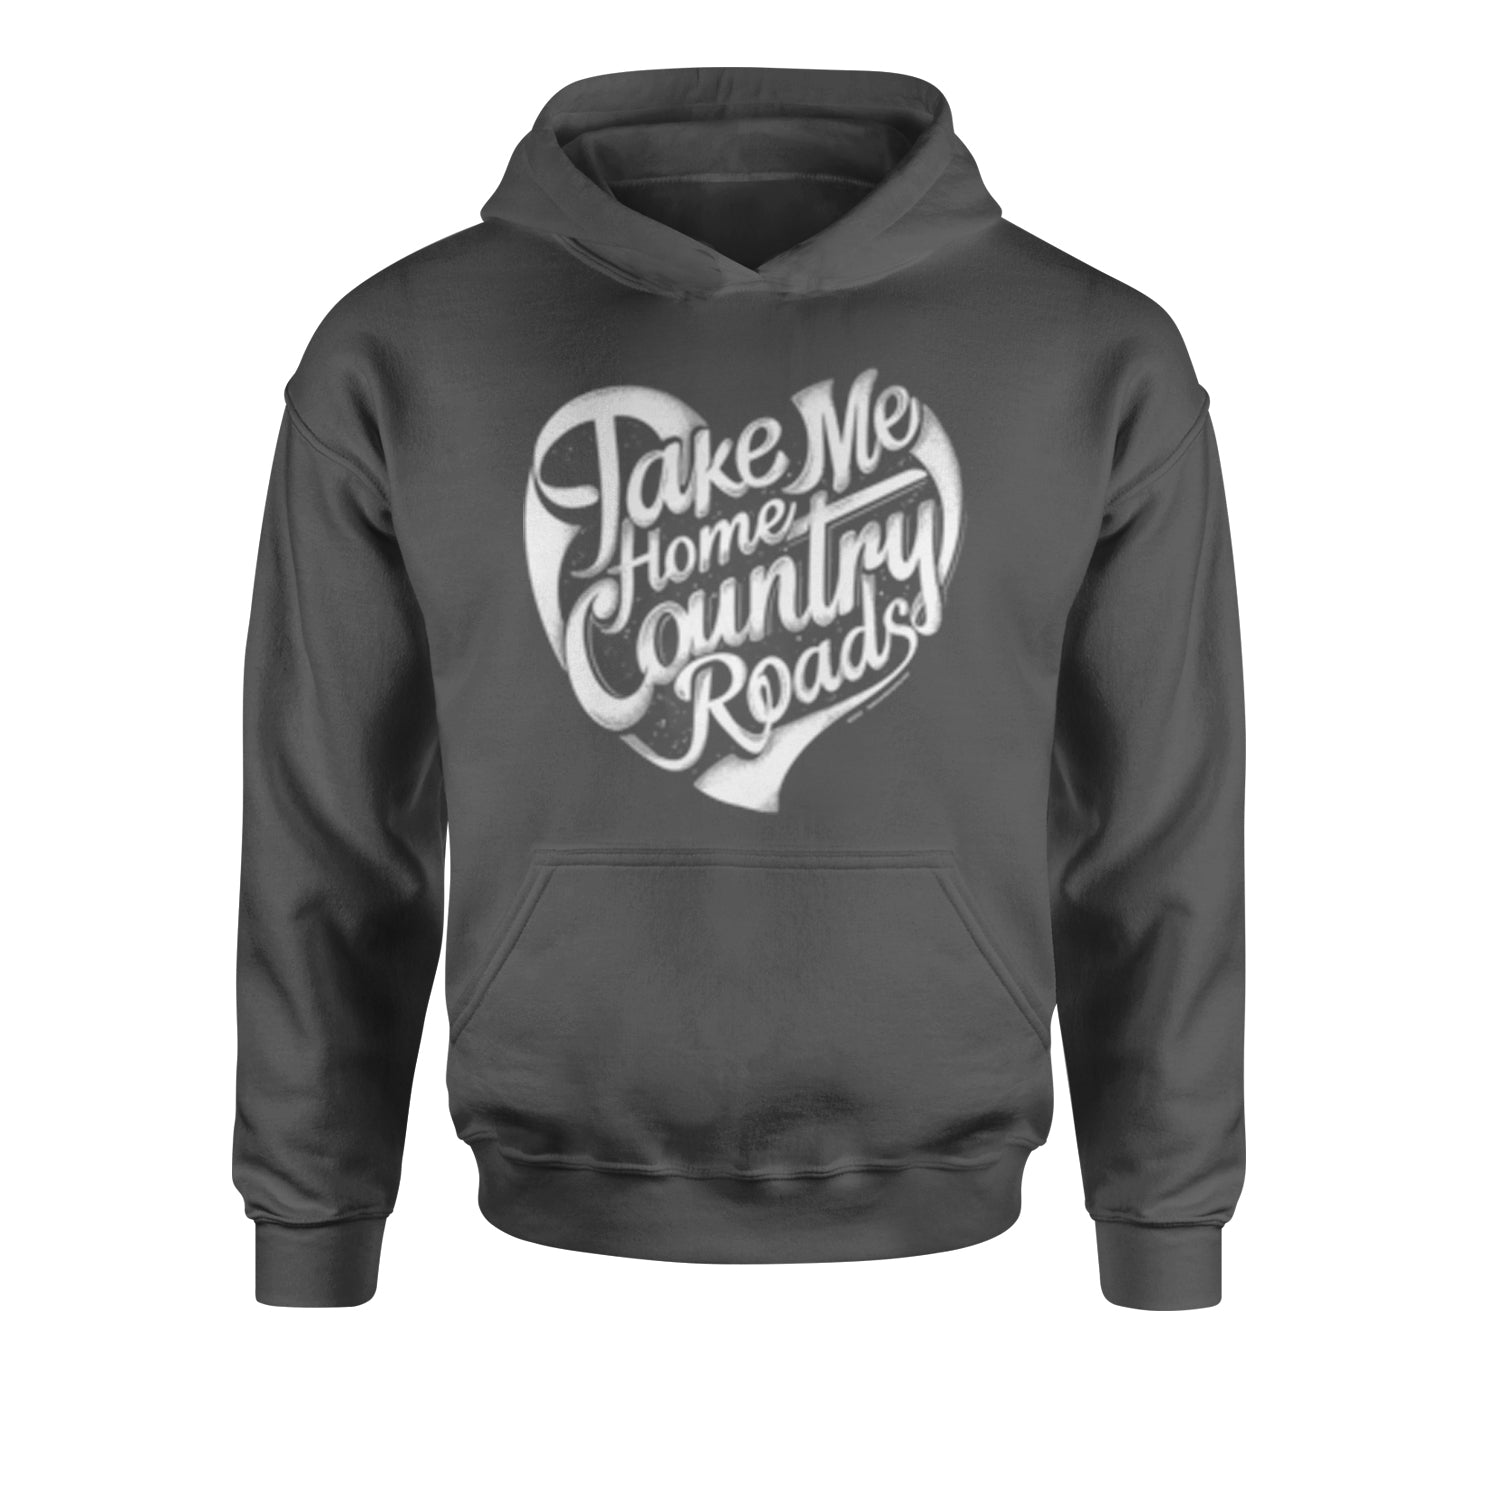 Take Me Home Country Roads Youth-Sized Hoodie country, karaoke, roads by Expression Tees